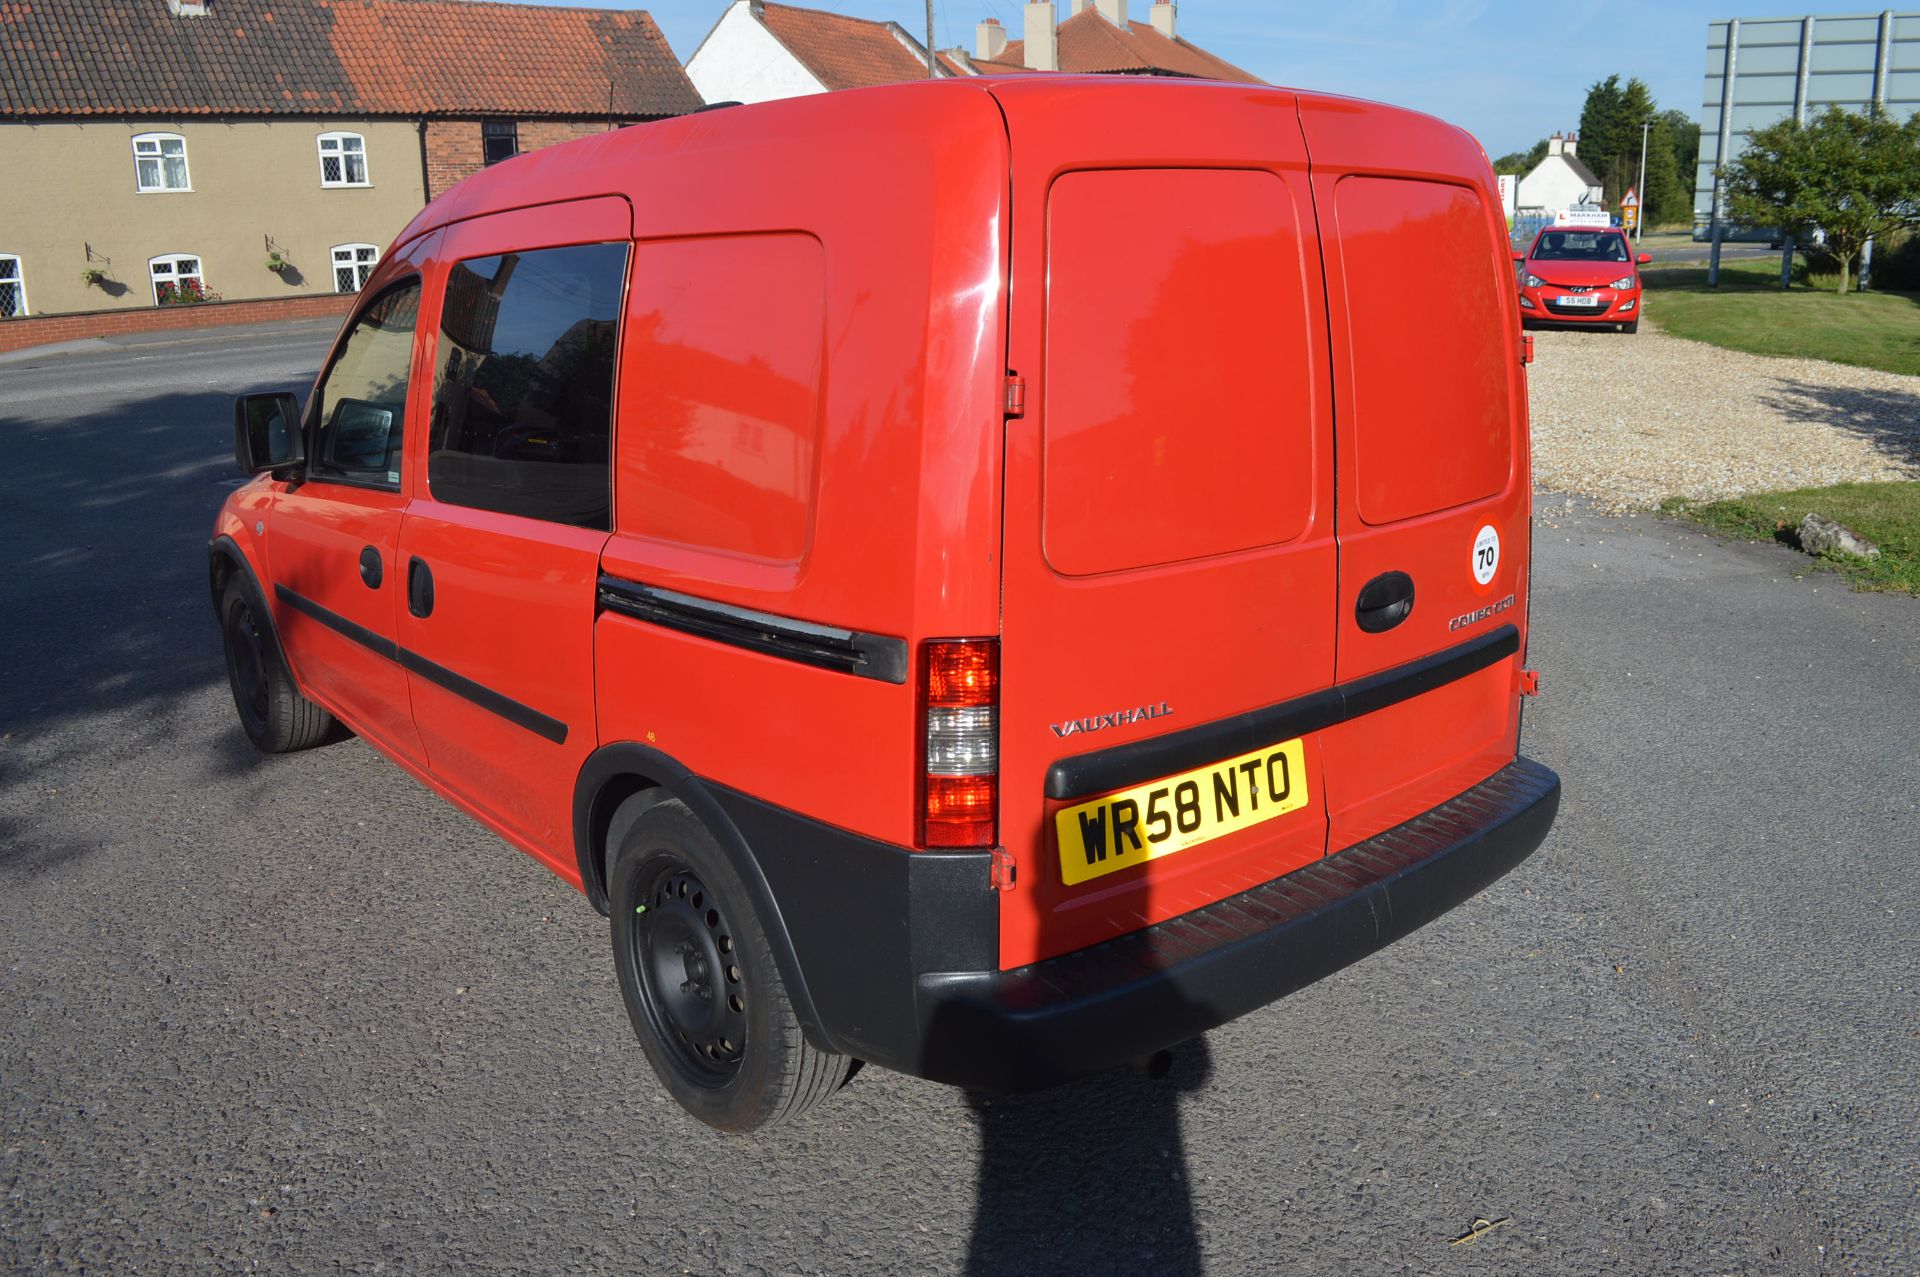 2008/58 REG VAUXHALL COMBO CDTI SWB CREW VAN - 1 OWNER FROM NEW, ROYAL MAIL *NO VAT* - Image 4 of 18